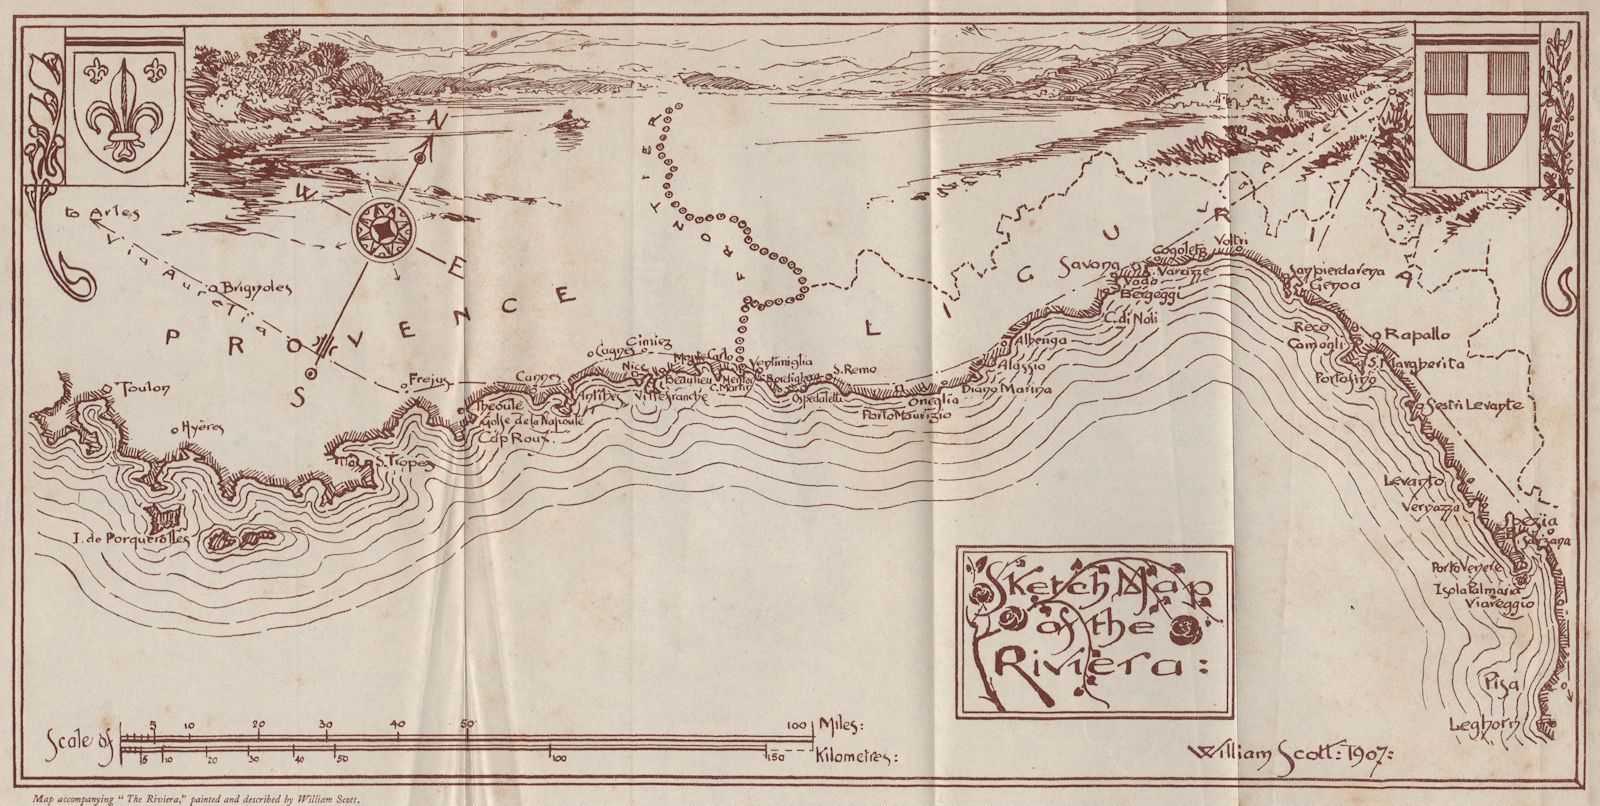 Sketch map of the French & Italian Riviera. Toulon - Livorno. Côte d'Azur 1907